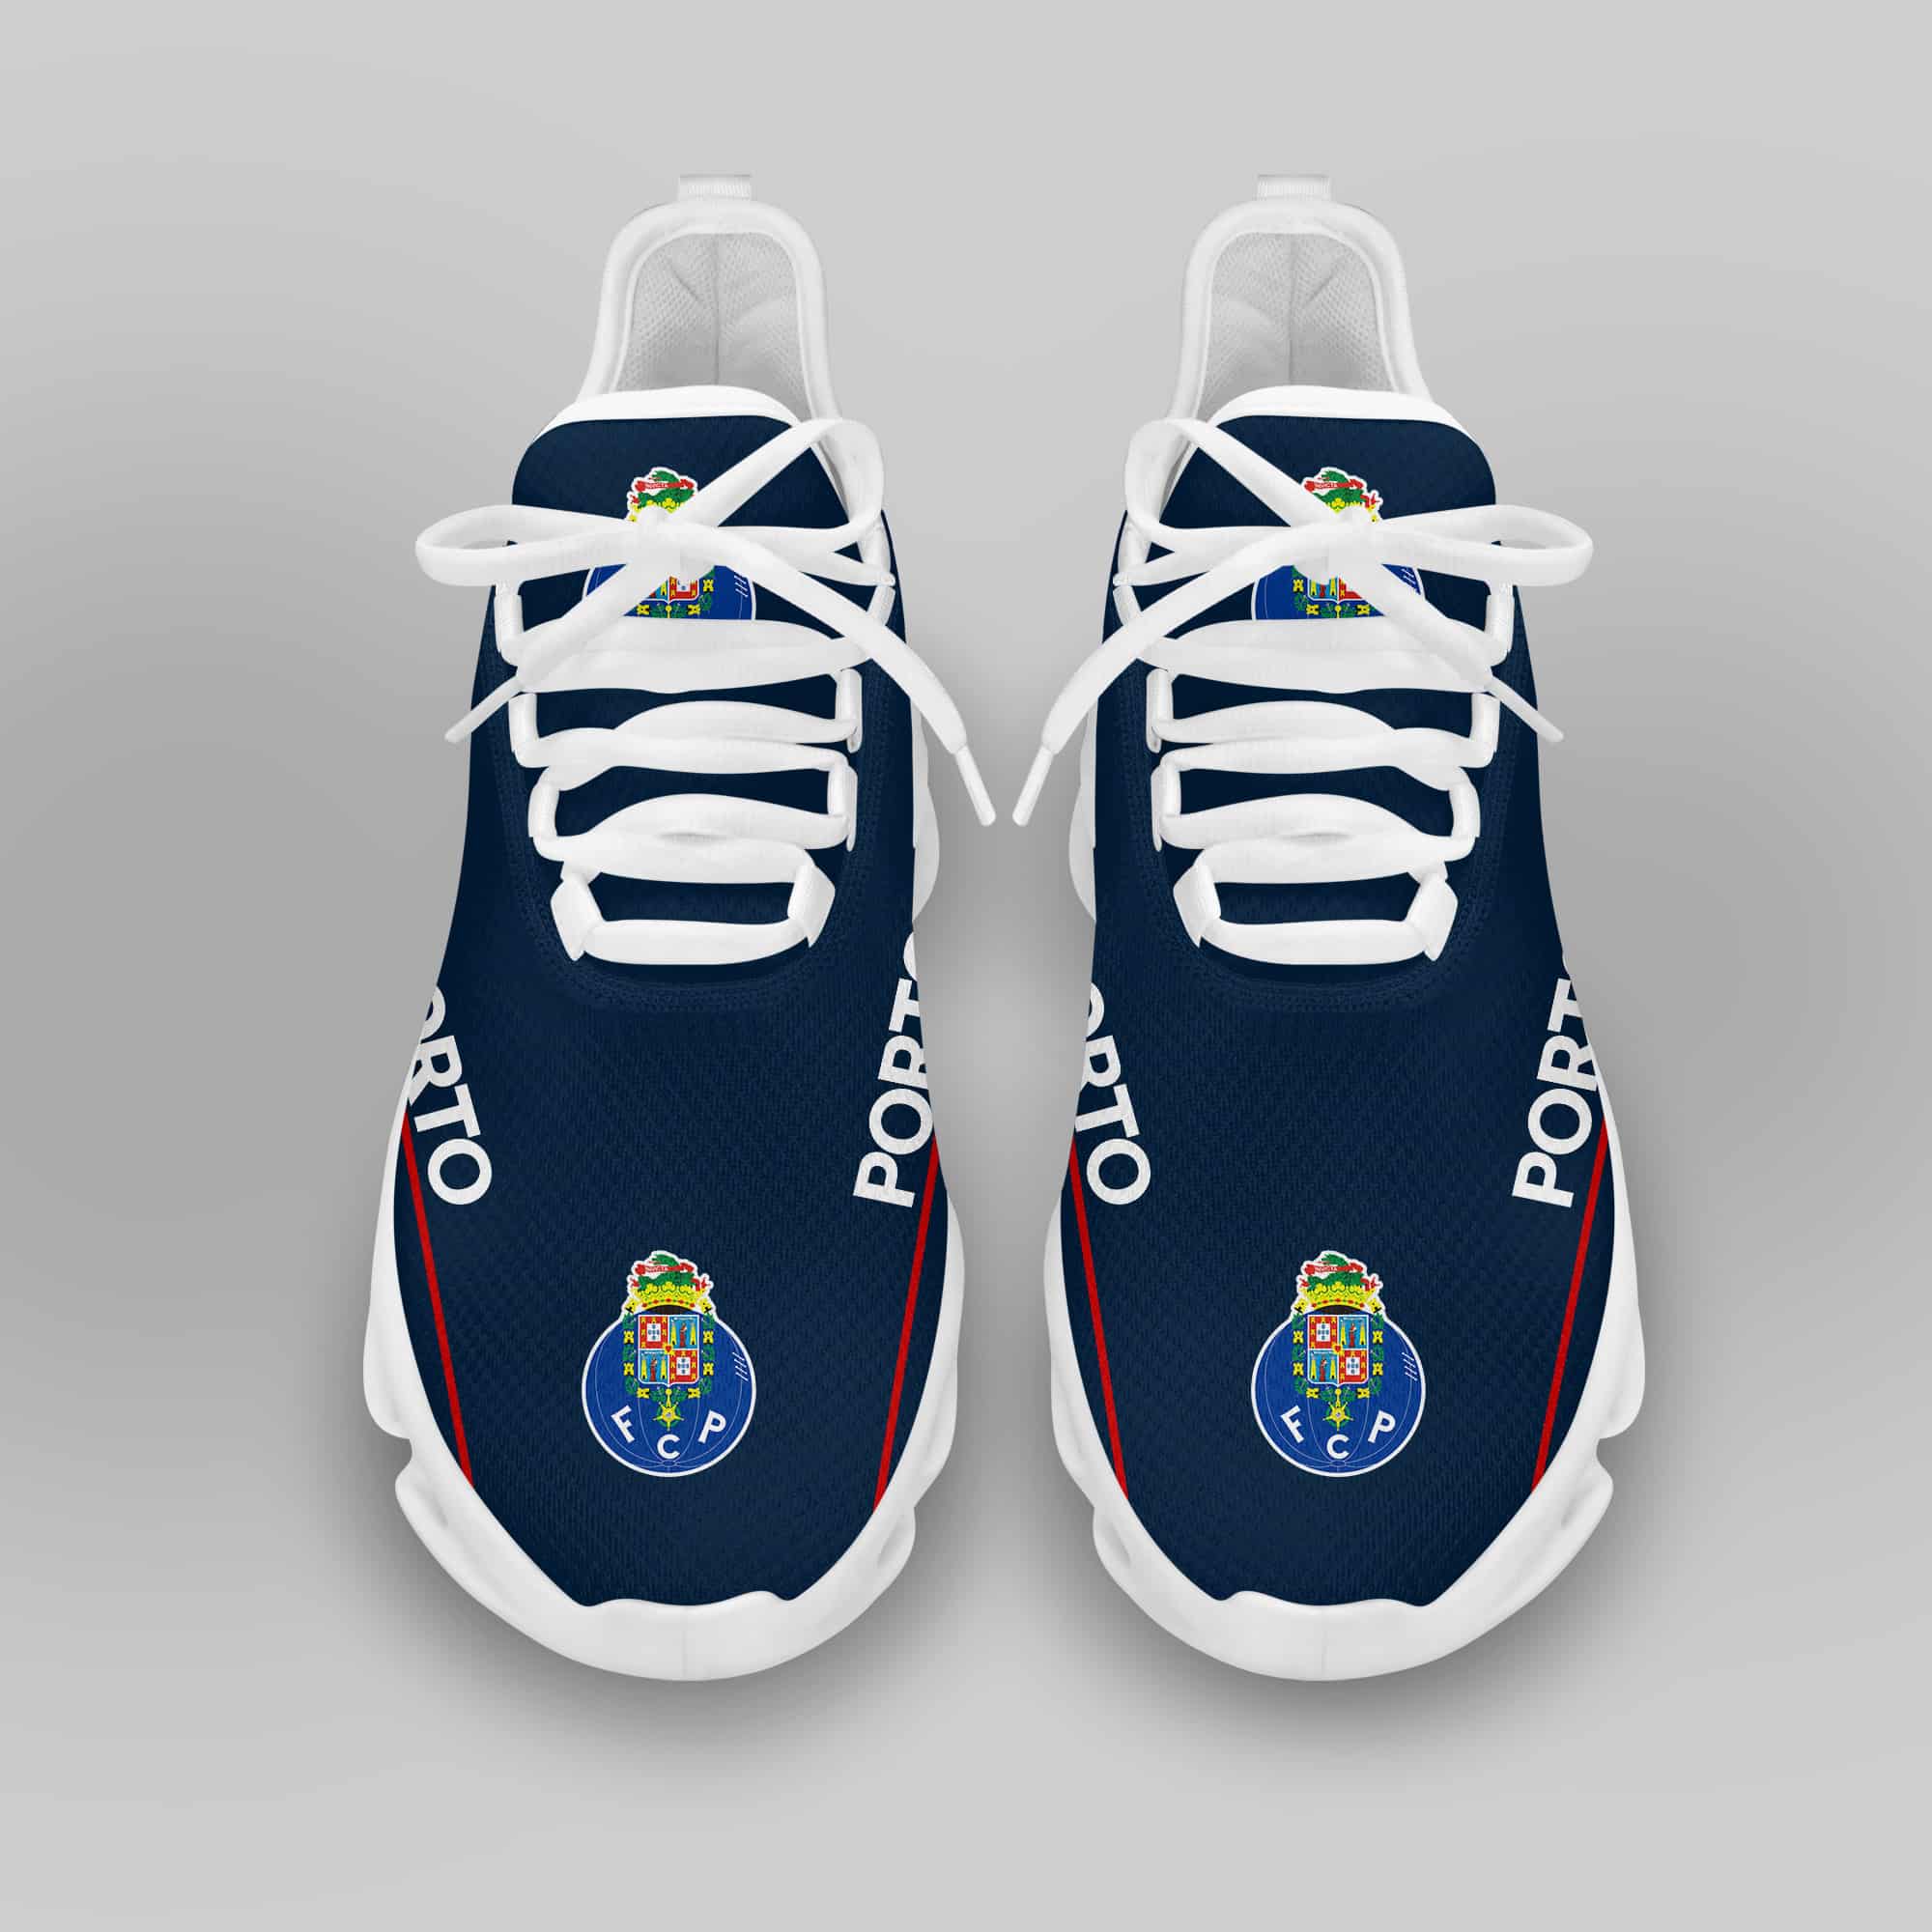 Fc Porto Running Shoes Max Soul Shoes Sneakers Ver 6 3